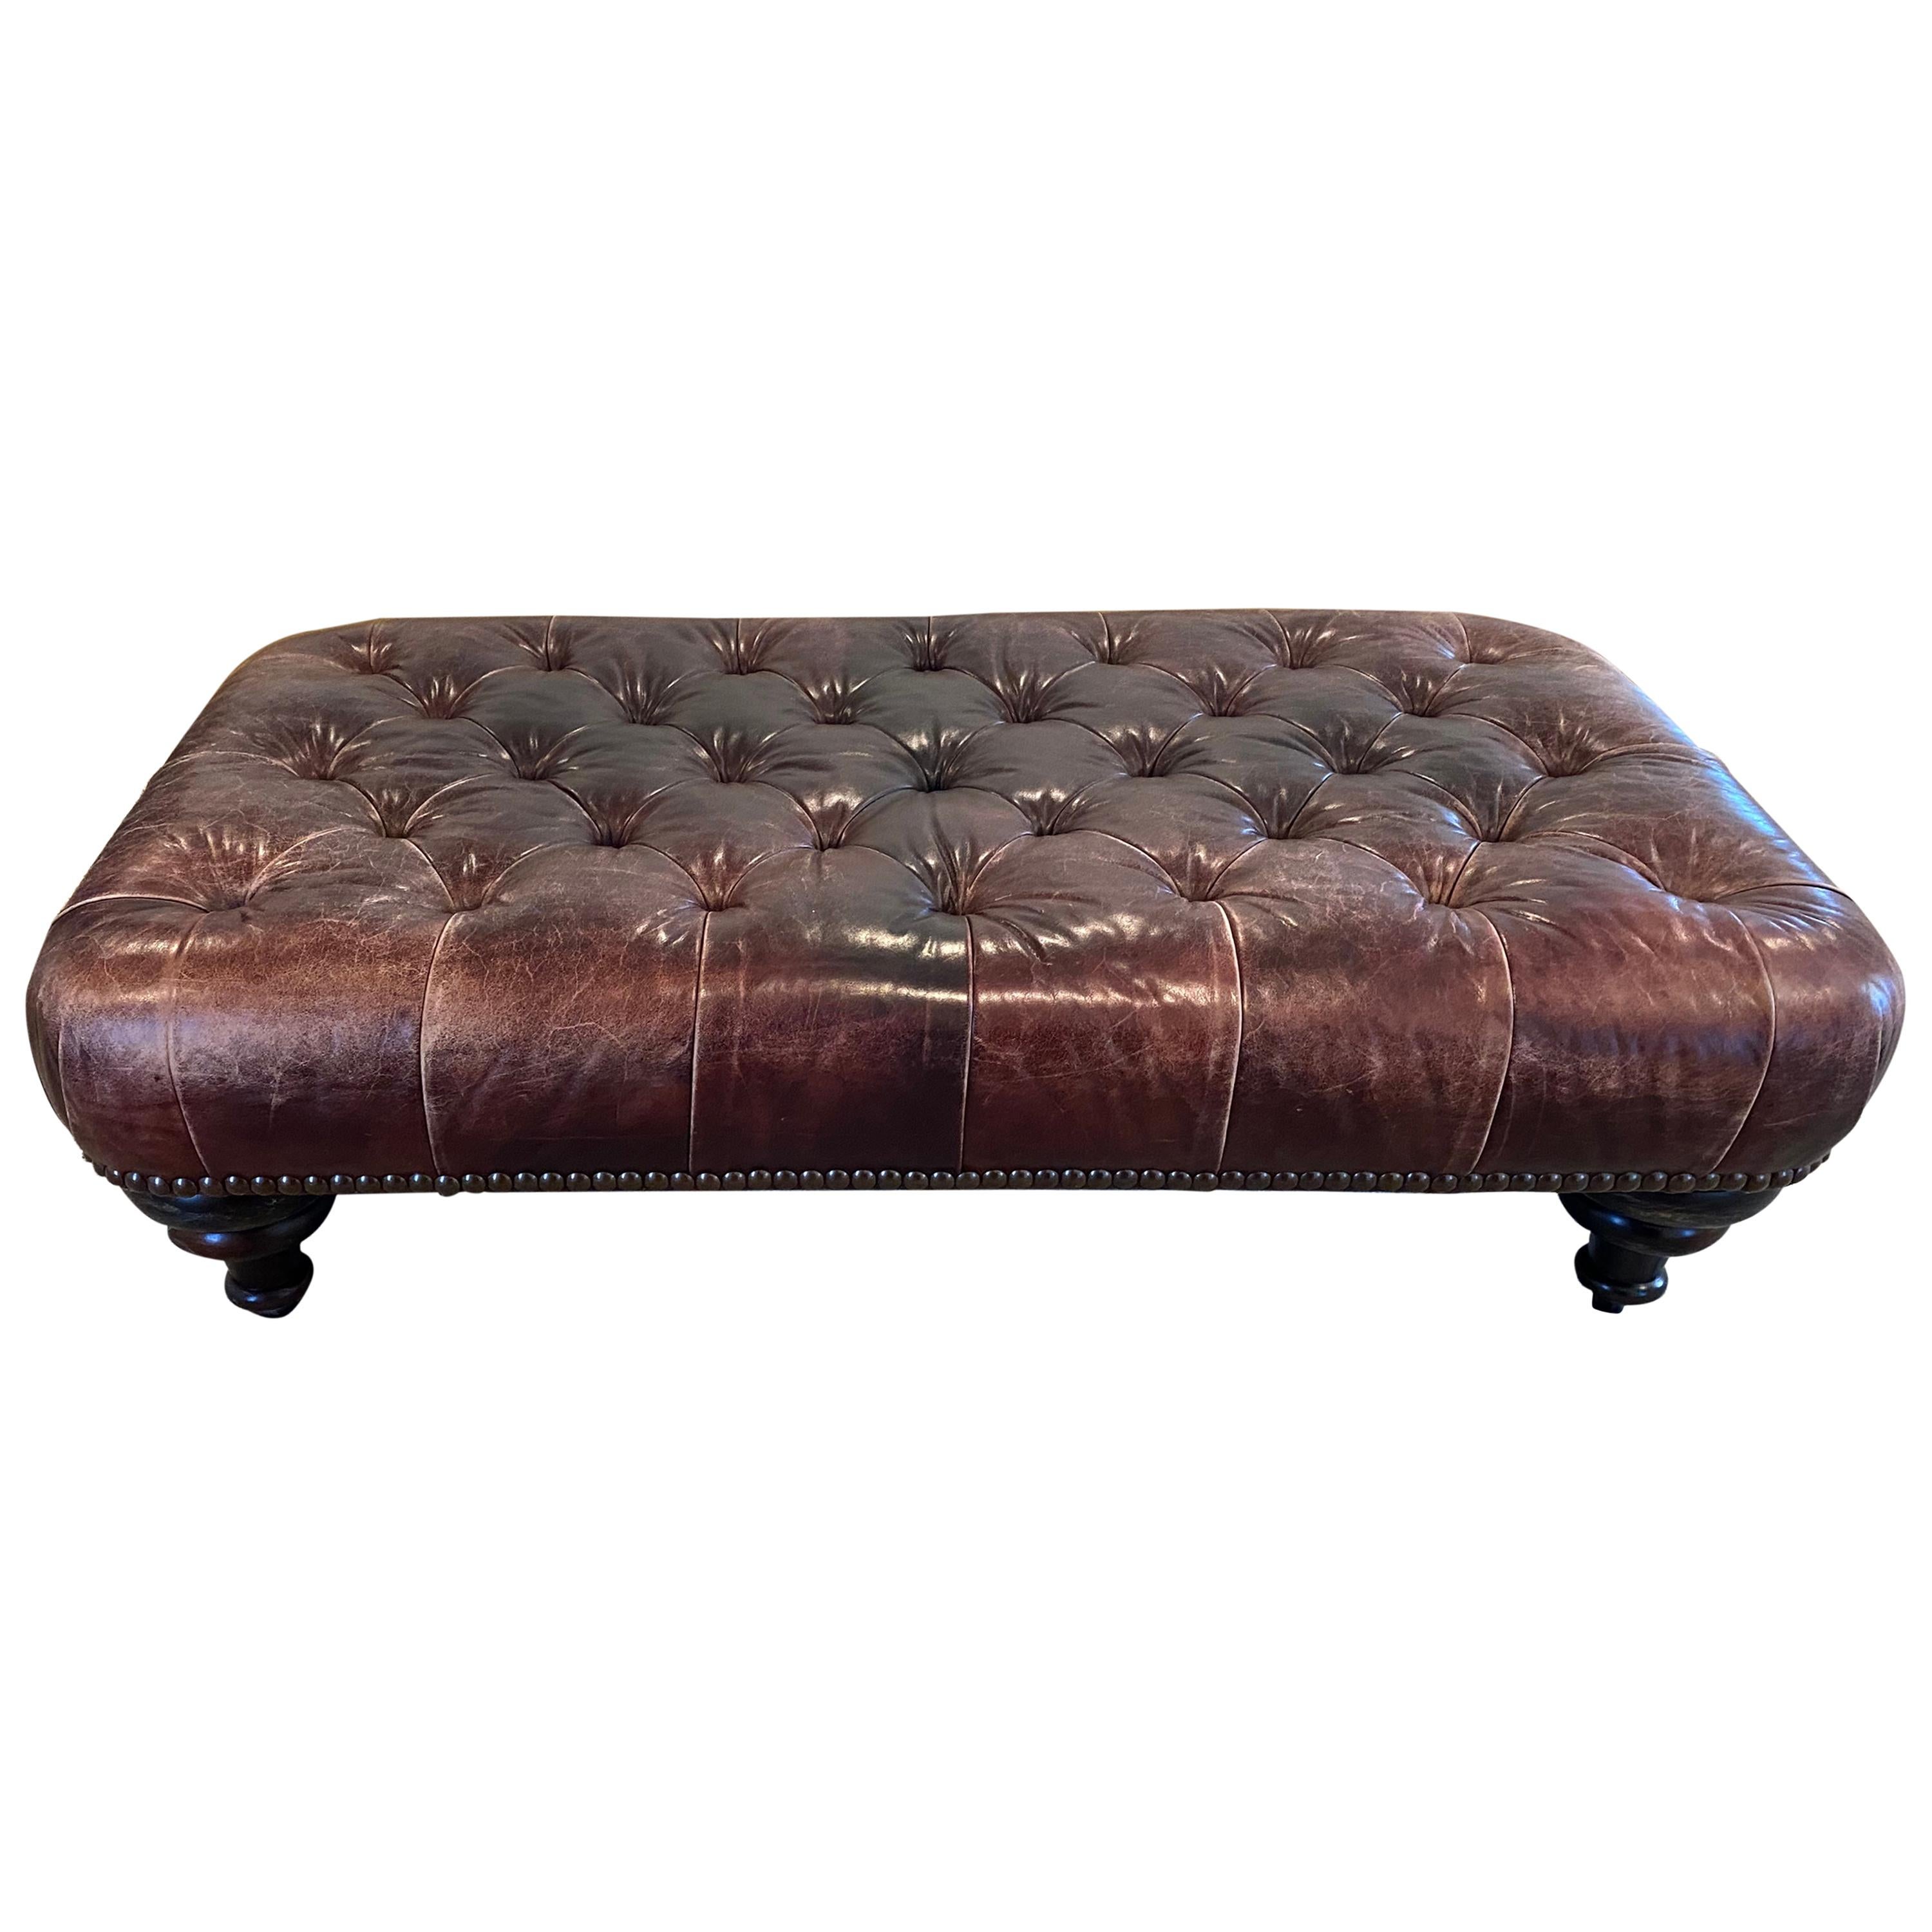 Classic Rich Tobacco Tufted Leather Chesterfield Style George Smith Ottoman